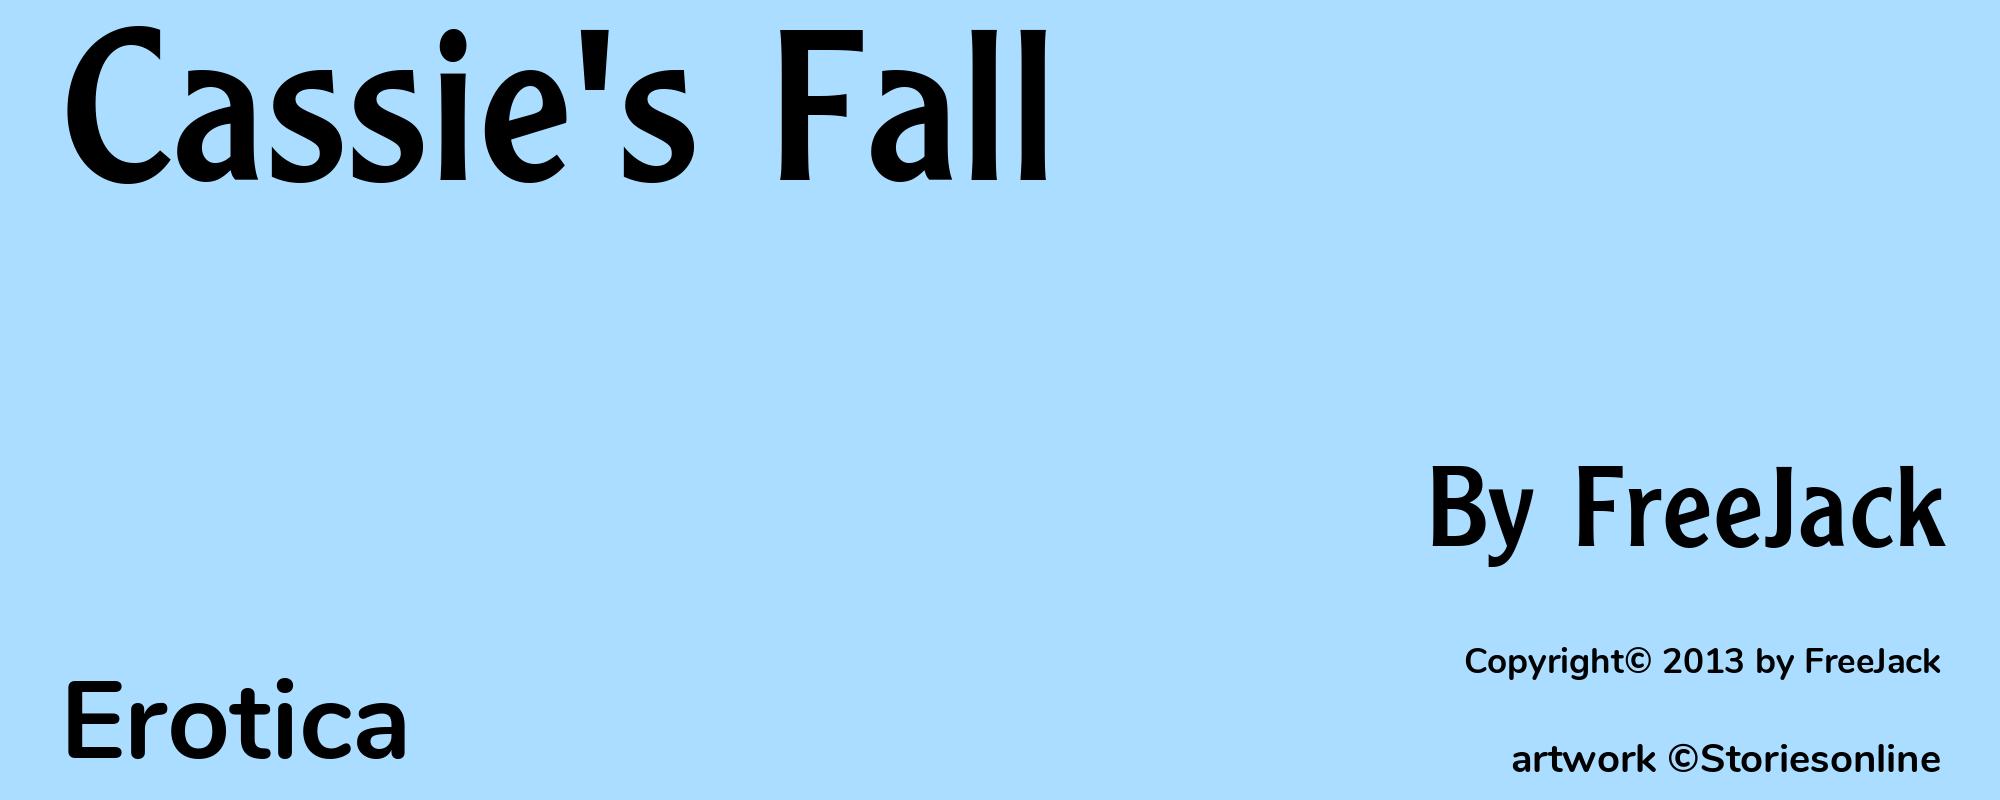 Cassie's Fall - Cover